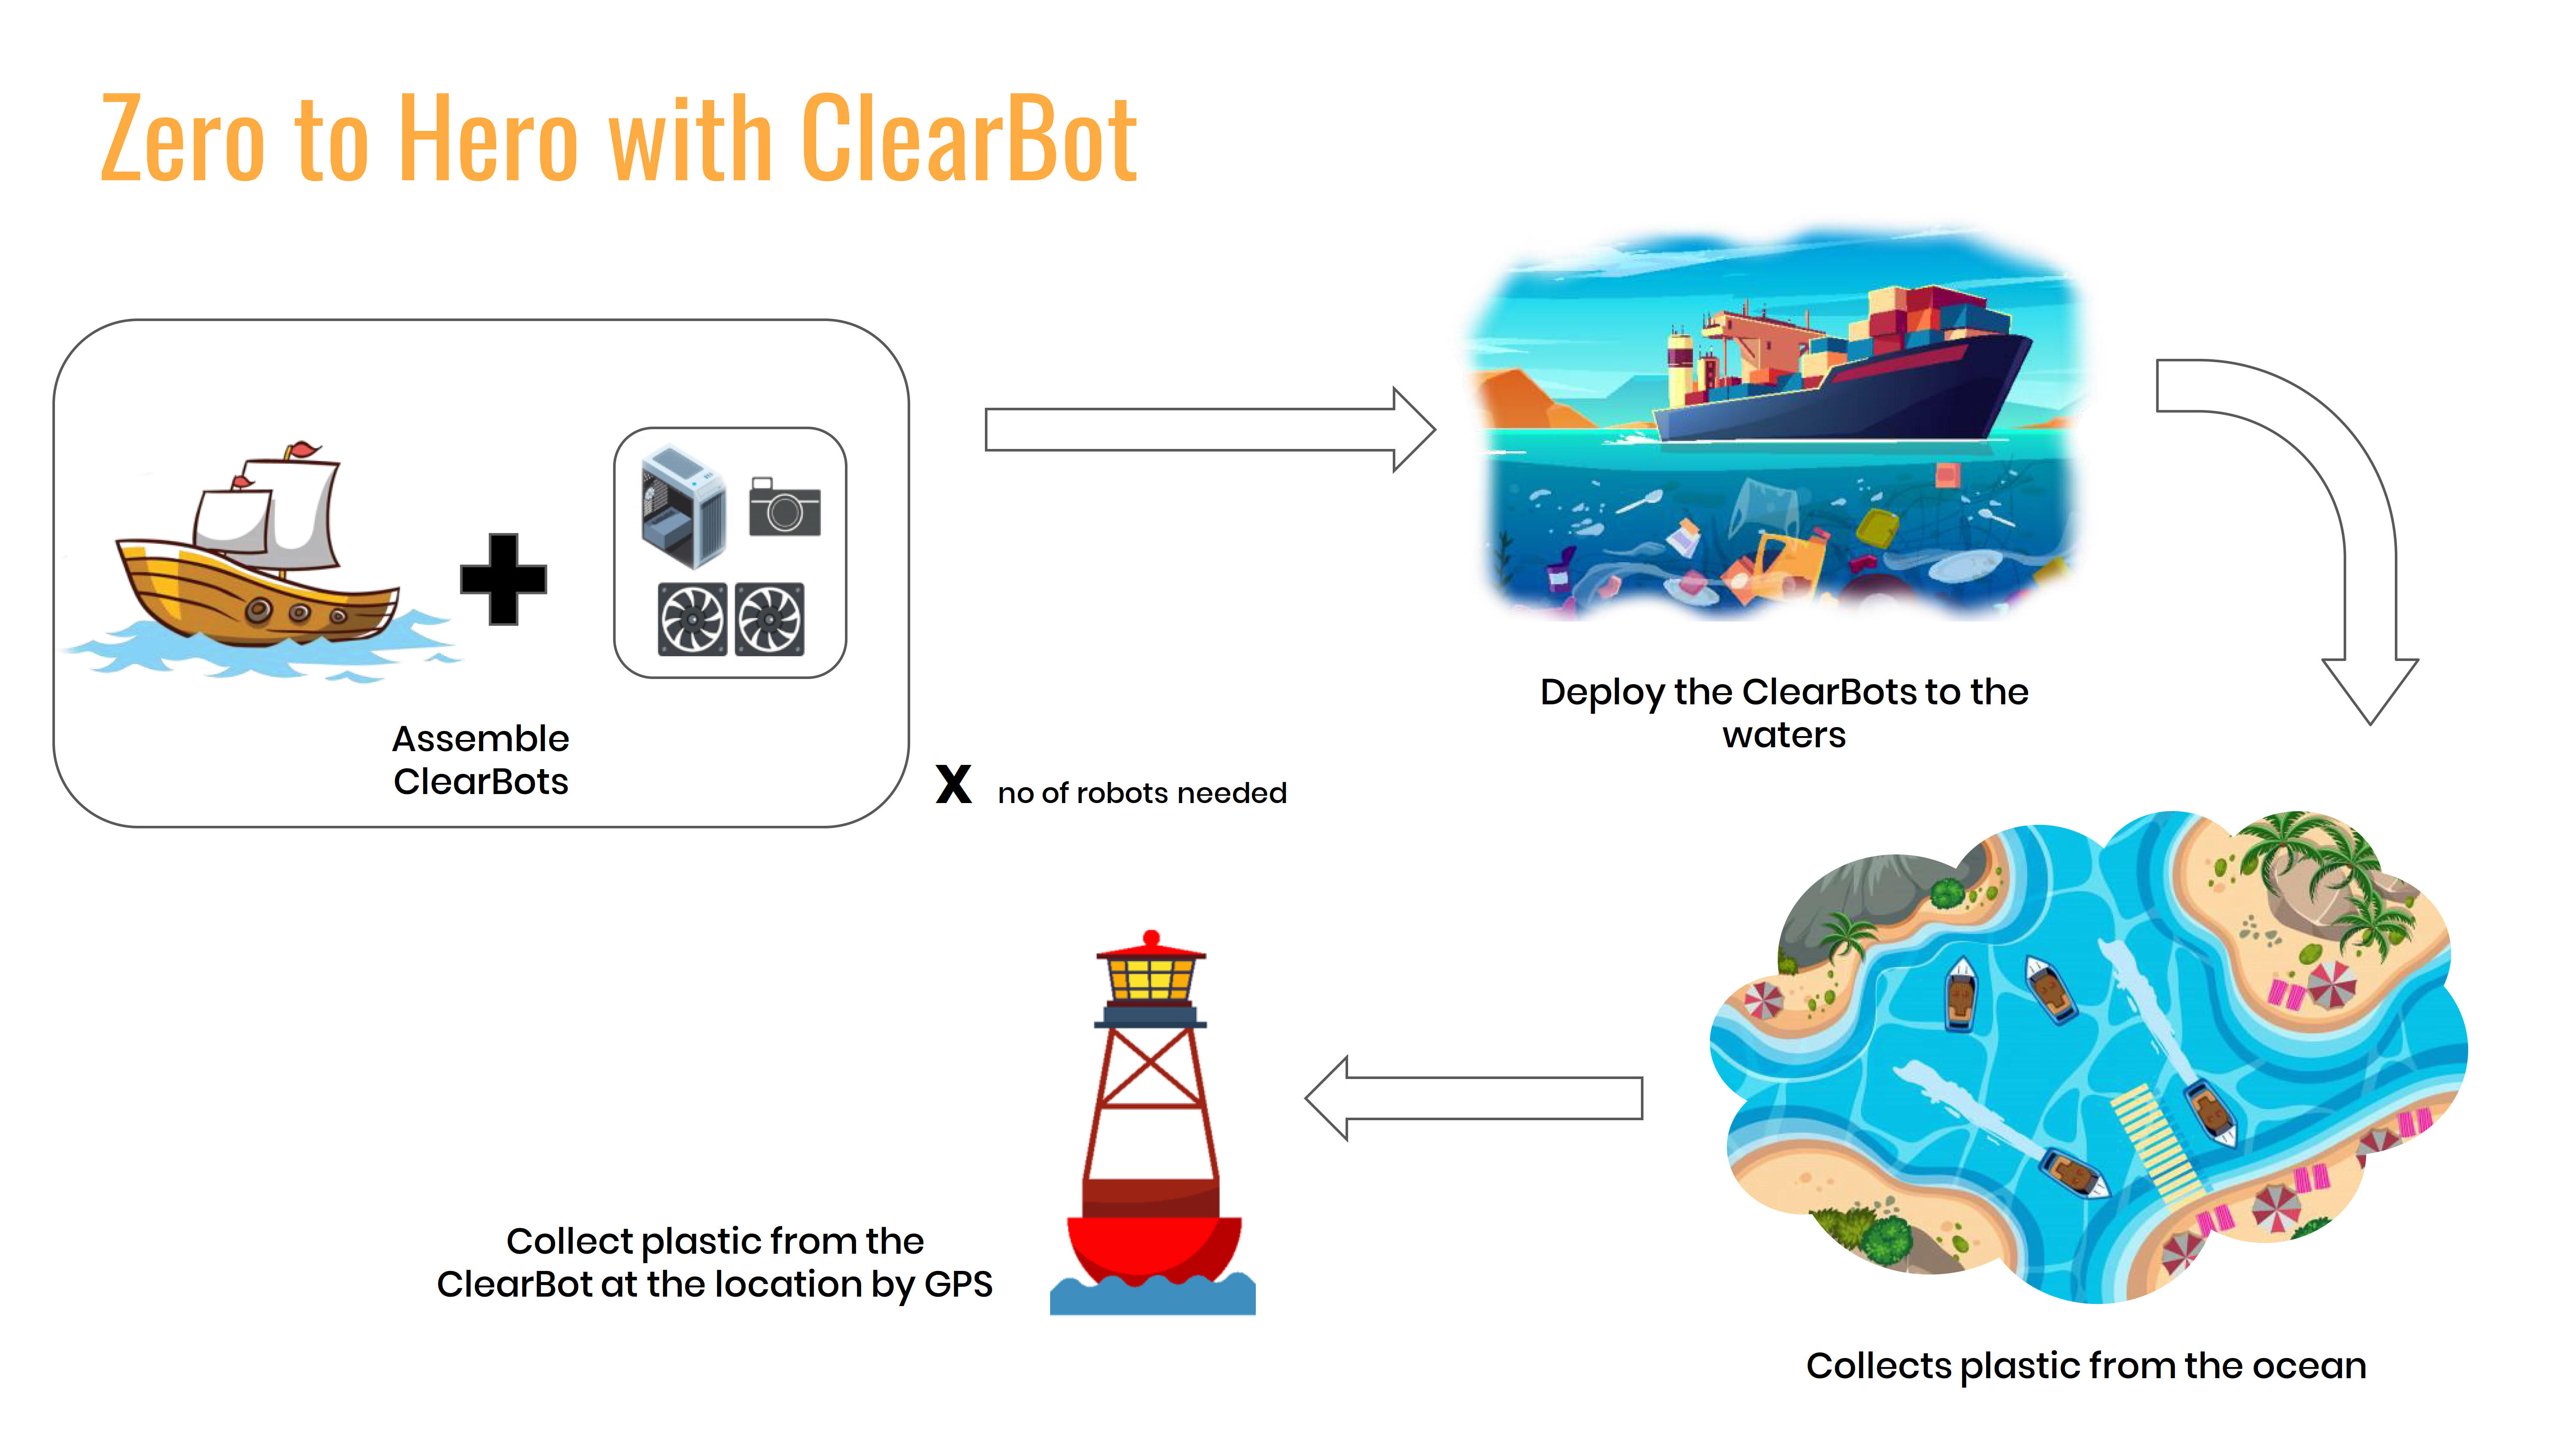 Another challenge we’ve learned in Bali was that just one robot alone is not going to have the range and capacity needed to make a tangible dent in cleaning up even a small beach.  

That’s why ClearBot will rely on a system approach where a swarm of simple robots that collect trash until they reach their capacity of run out of battery. At that point, the robot goes into hibernation and sends out beacons of its location so a team of volunteer can collect the robots AND the trash back to shore for sorting.